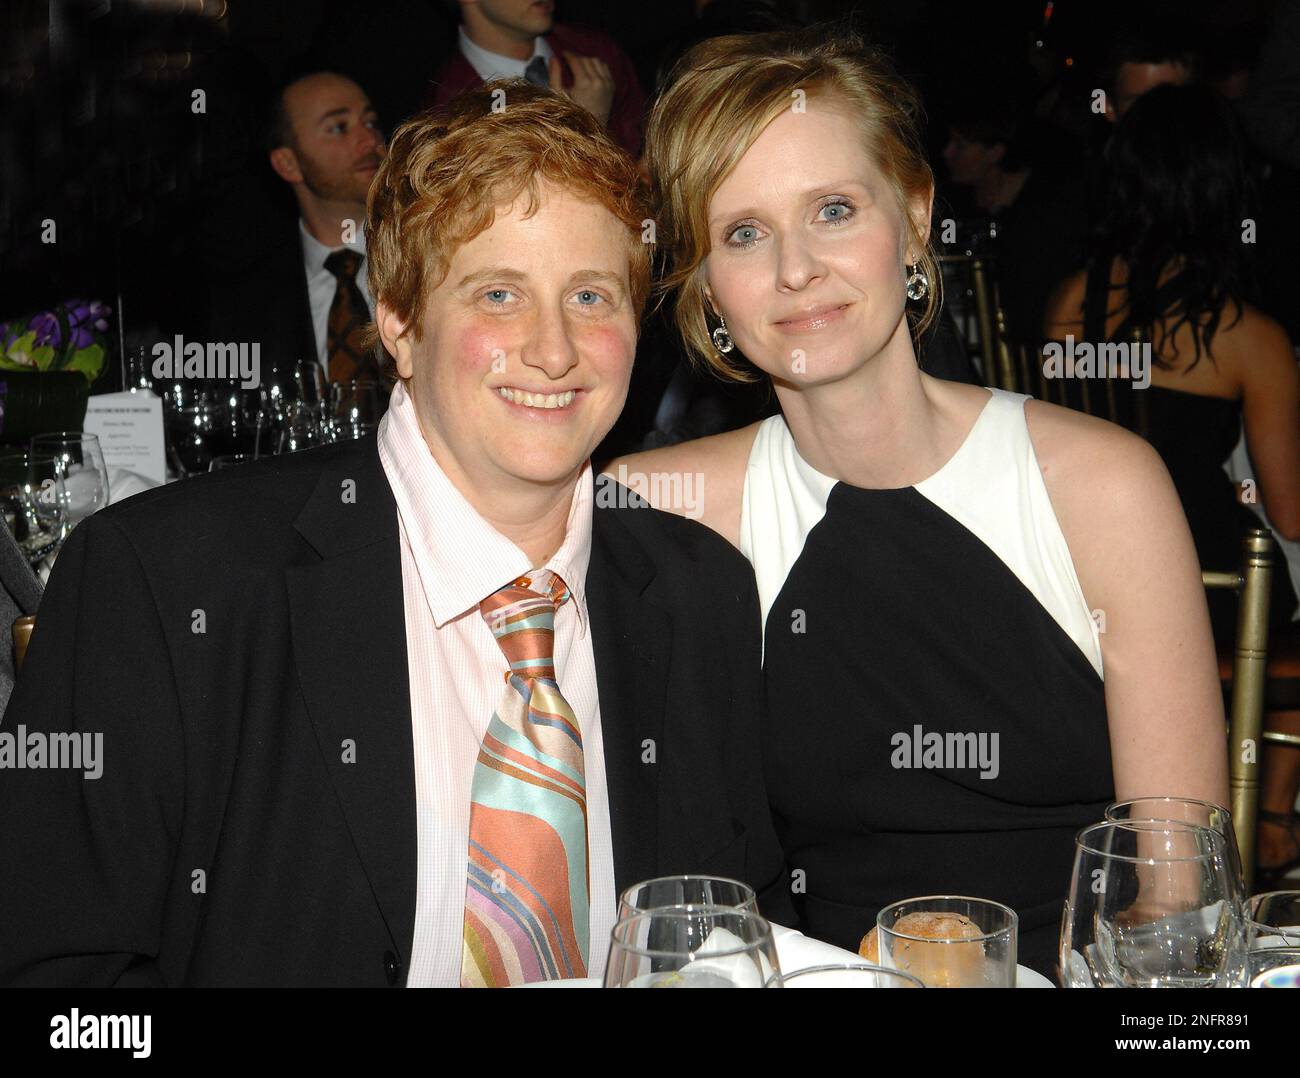 Actress Cynthia Nixon, right, and life partner Christine Marinoni attends the Point Foundation Honors benefit dinner at Capitale, Monday, April 7, 2008 in New York picture